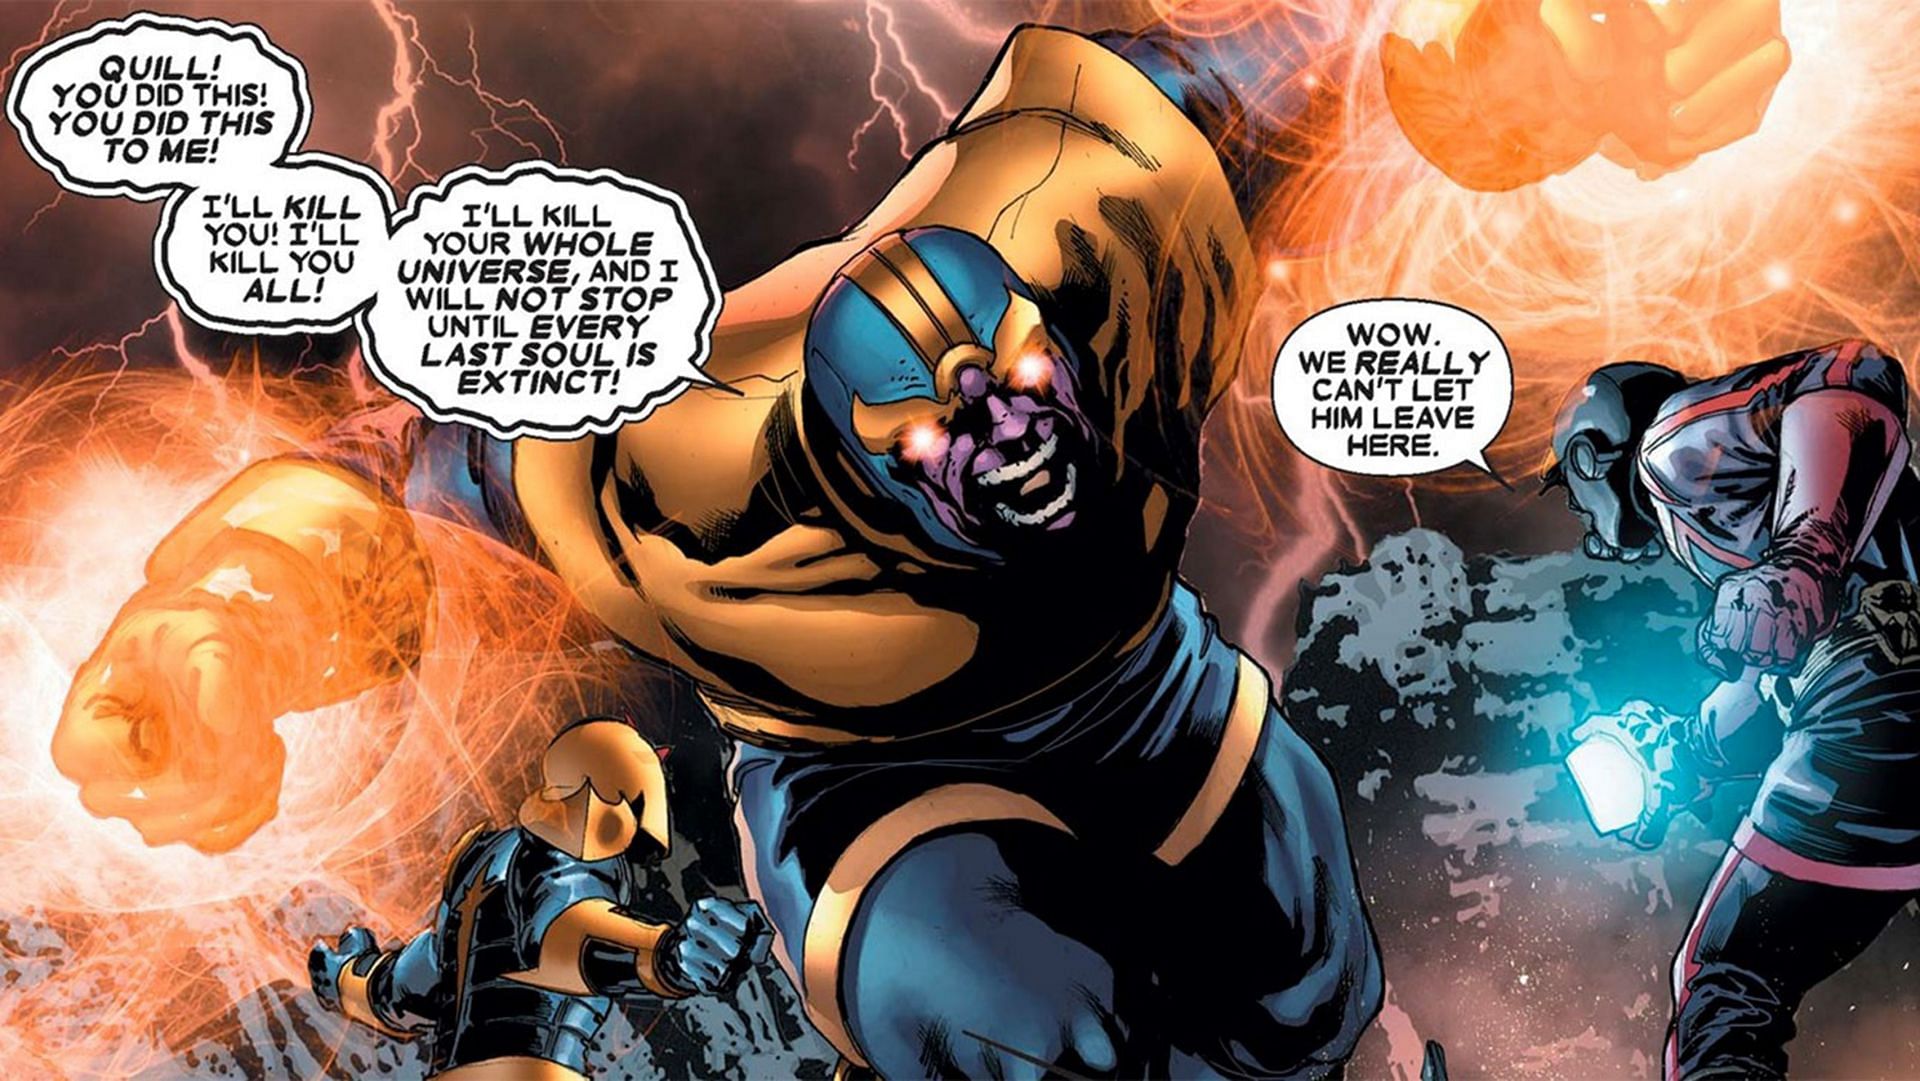 Guardians of the Galaxy: The Thanos Imperative, penned by Dan Abnett and Andy Lanning, stands as a must-read Marvel Comics series. (Image Via Marvel)